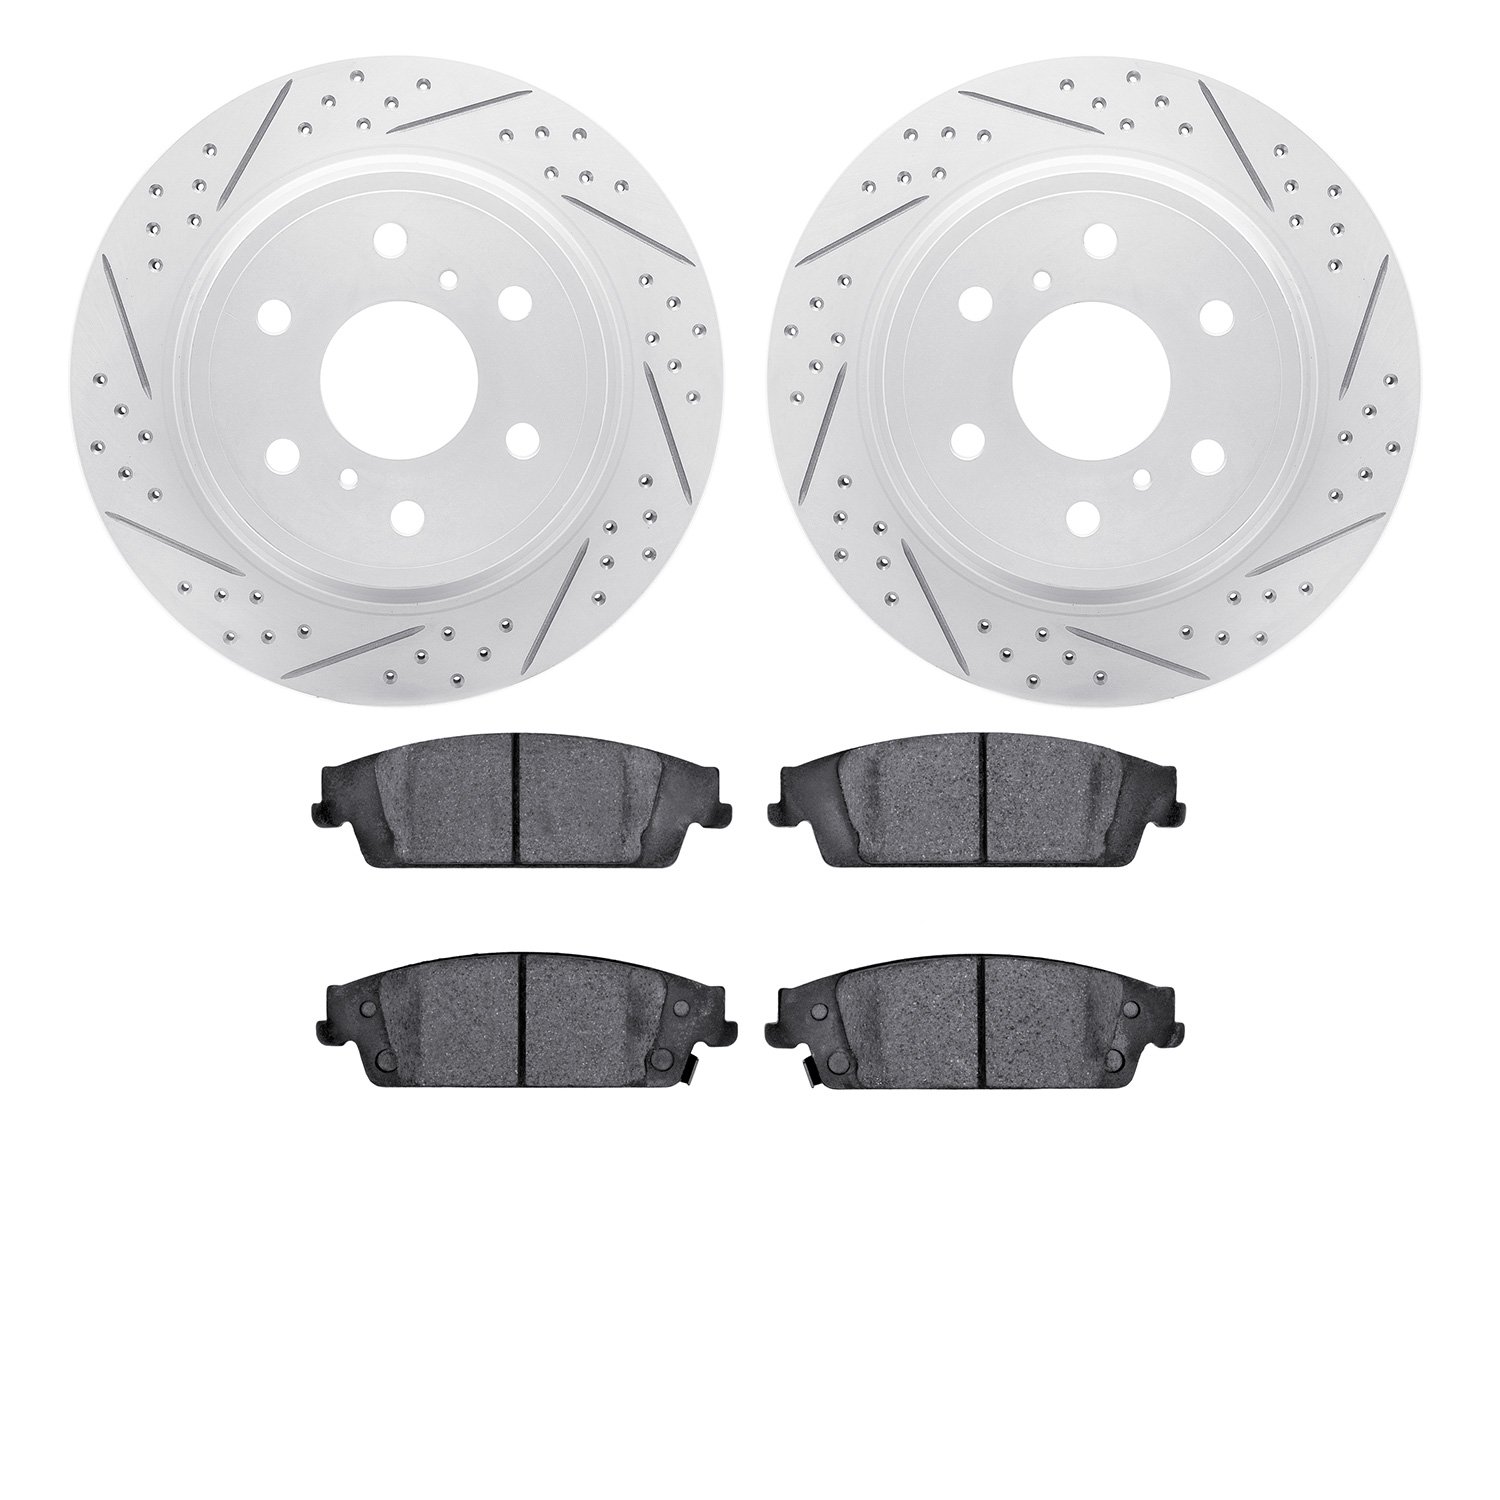 2202-48054 Geoperformance Drilled/Slotted Rotors w/Heavy-Duty Pads Kit, 2014-2020 GM, Position: Rear